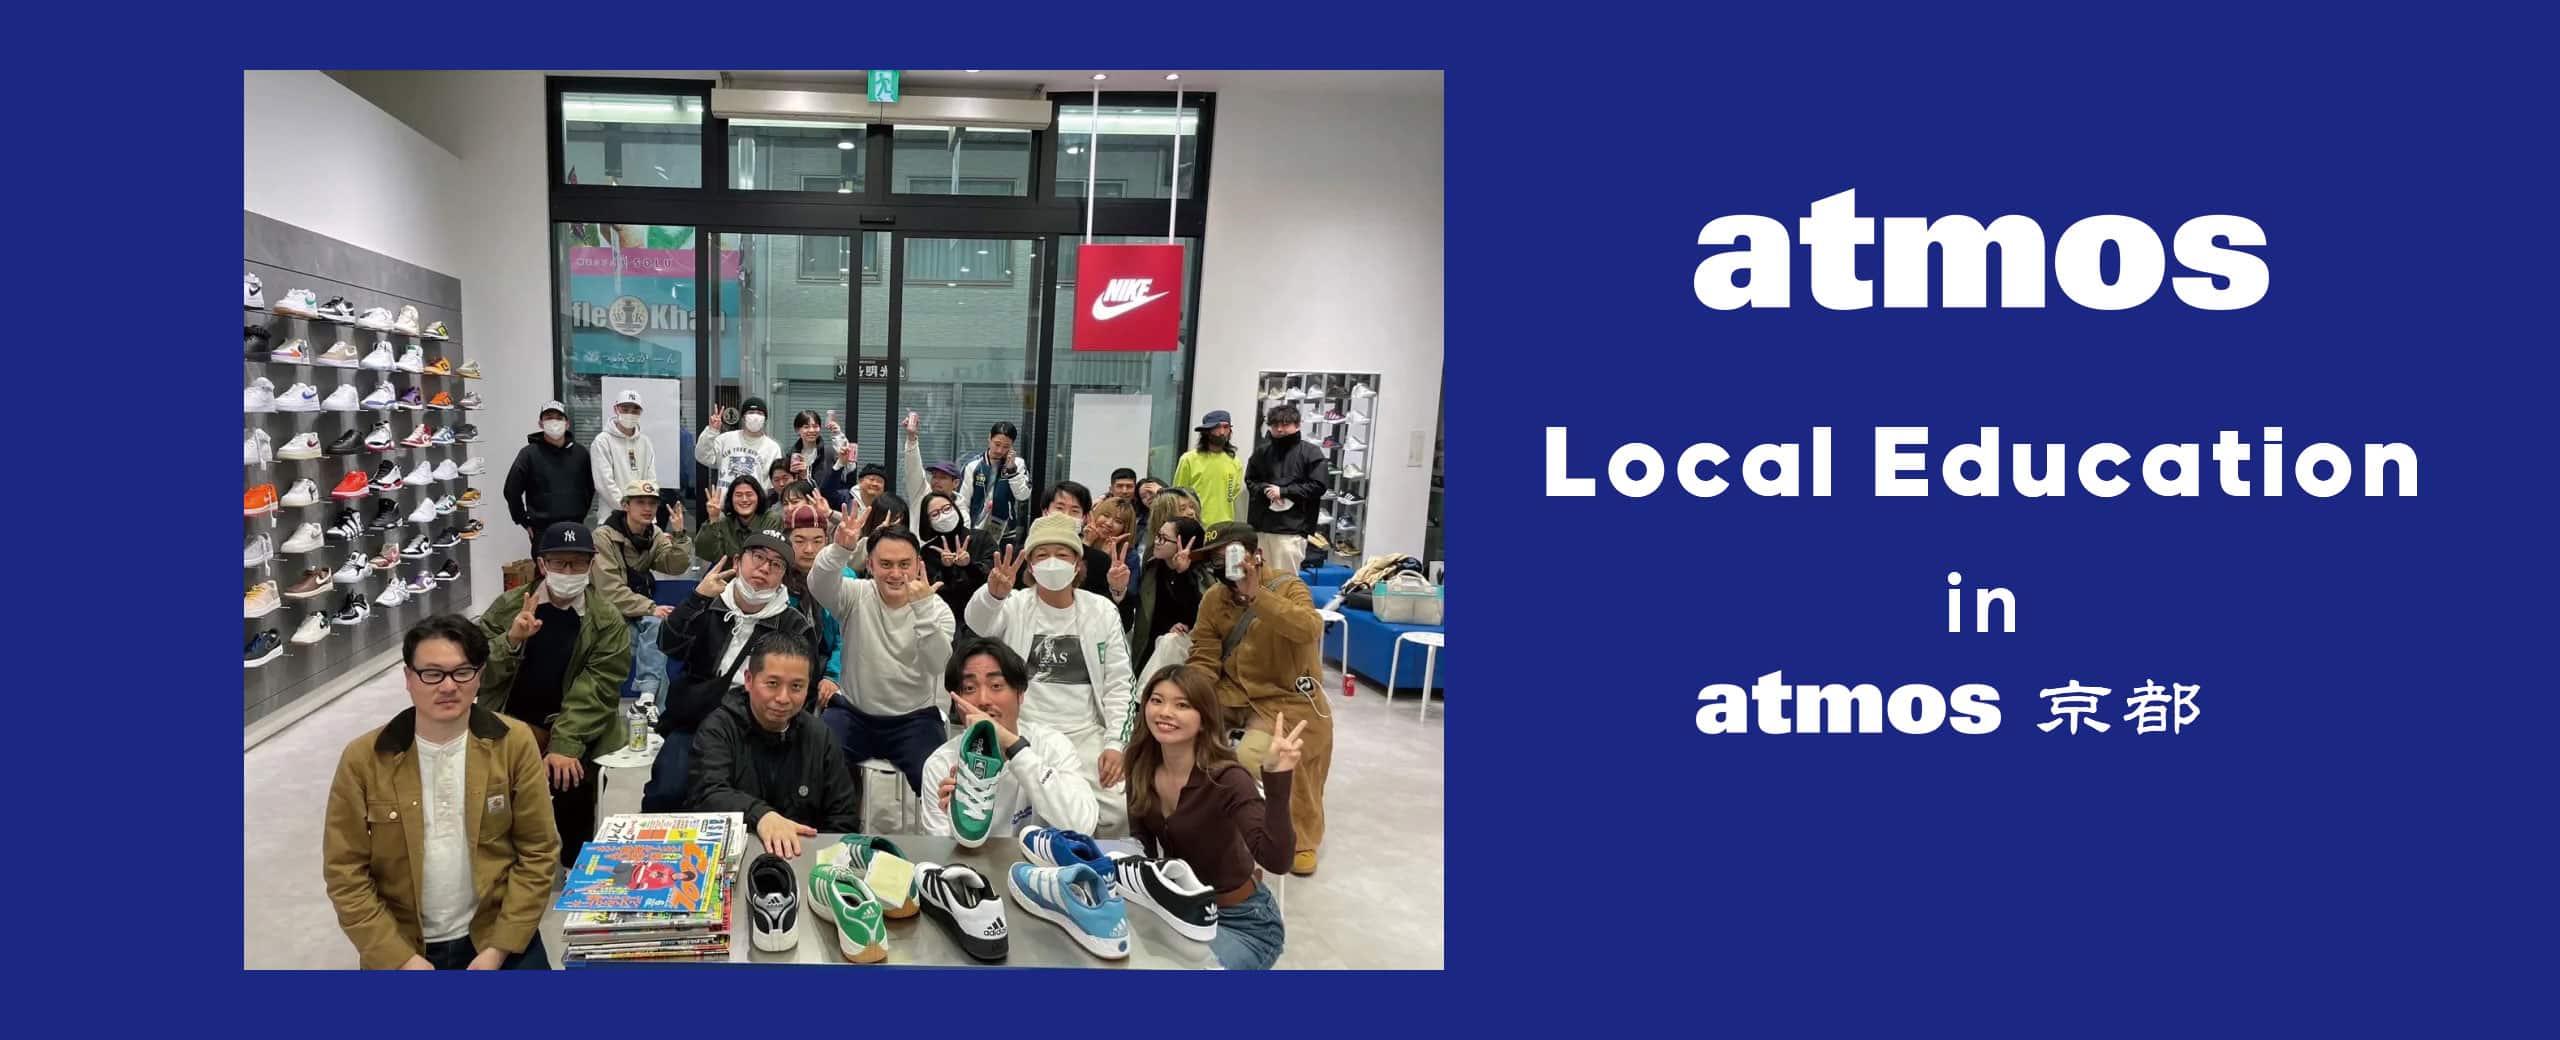 "atmos Local Education in atmos 京都"